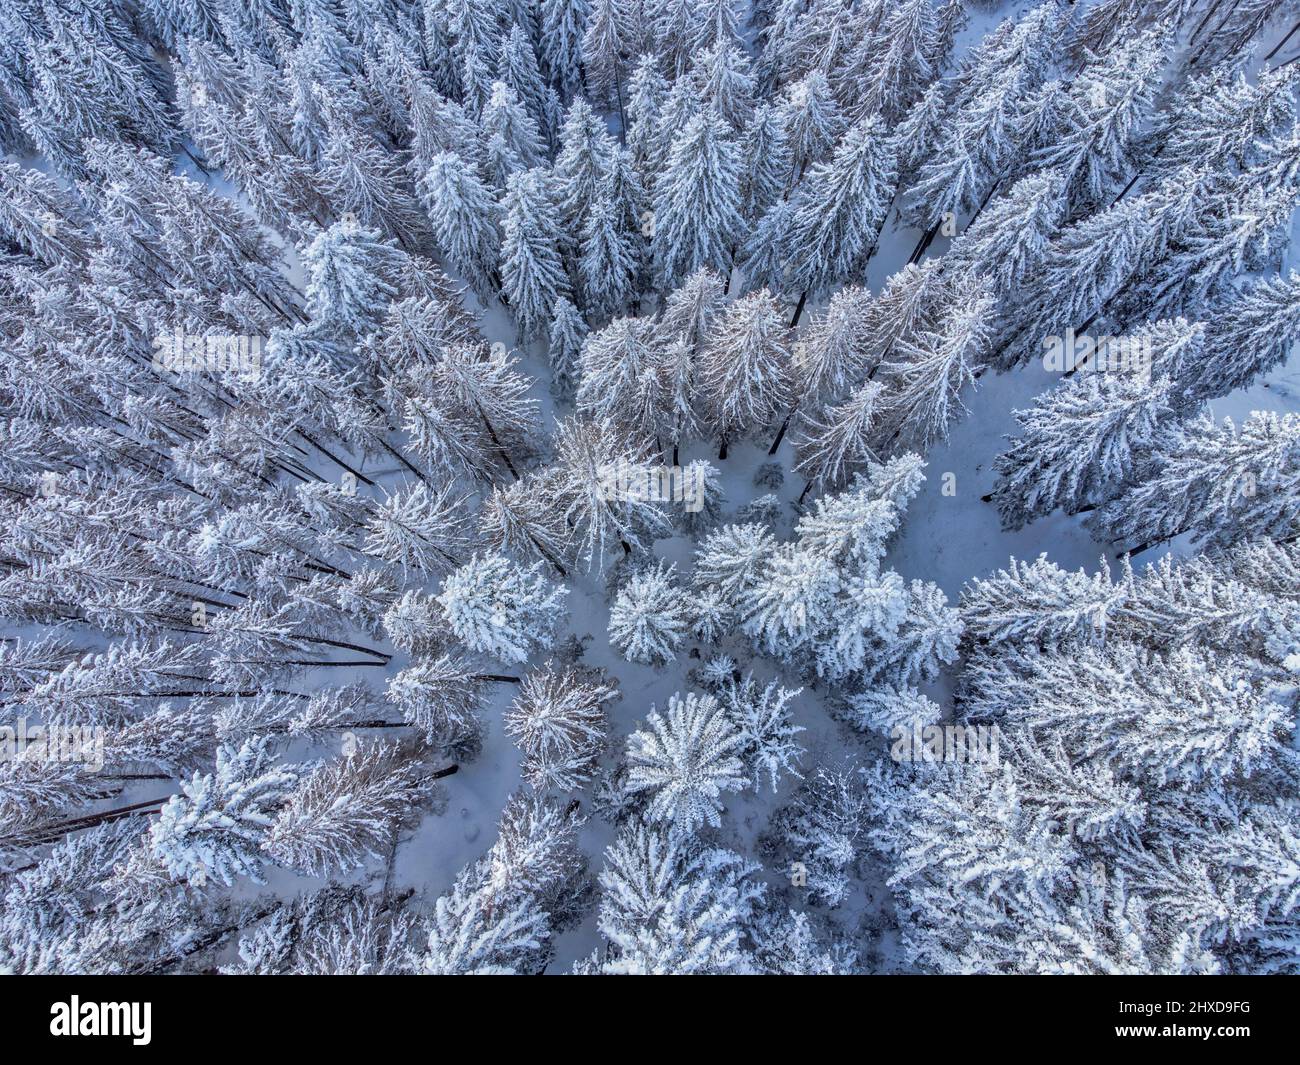 Europe, Italy, Veneto, province of Belluno, Dolomites, elevated view on a coniferous forest after a snowfall Stock Photo